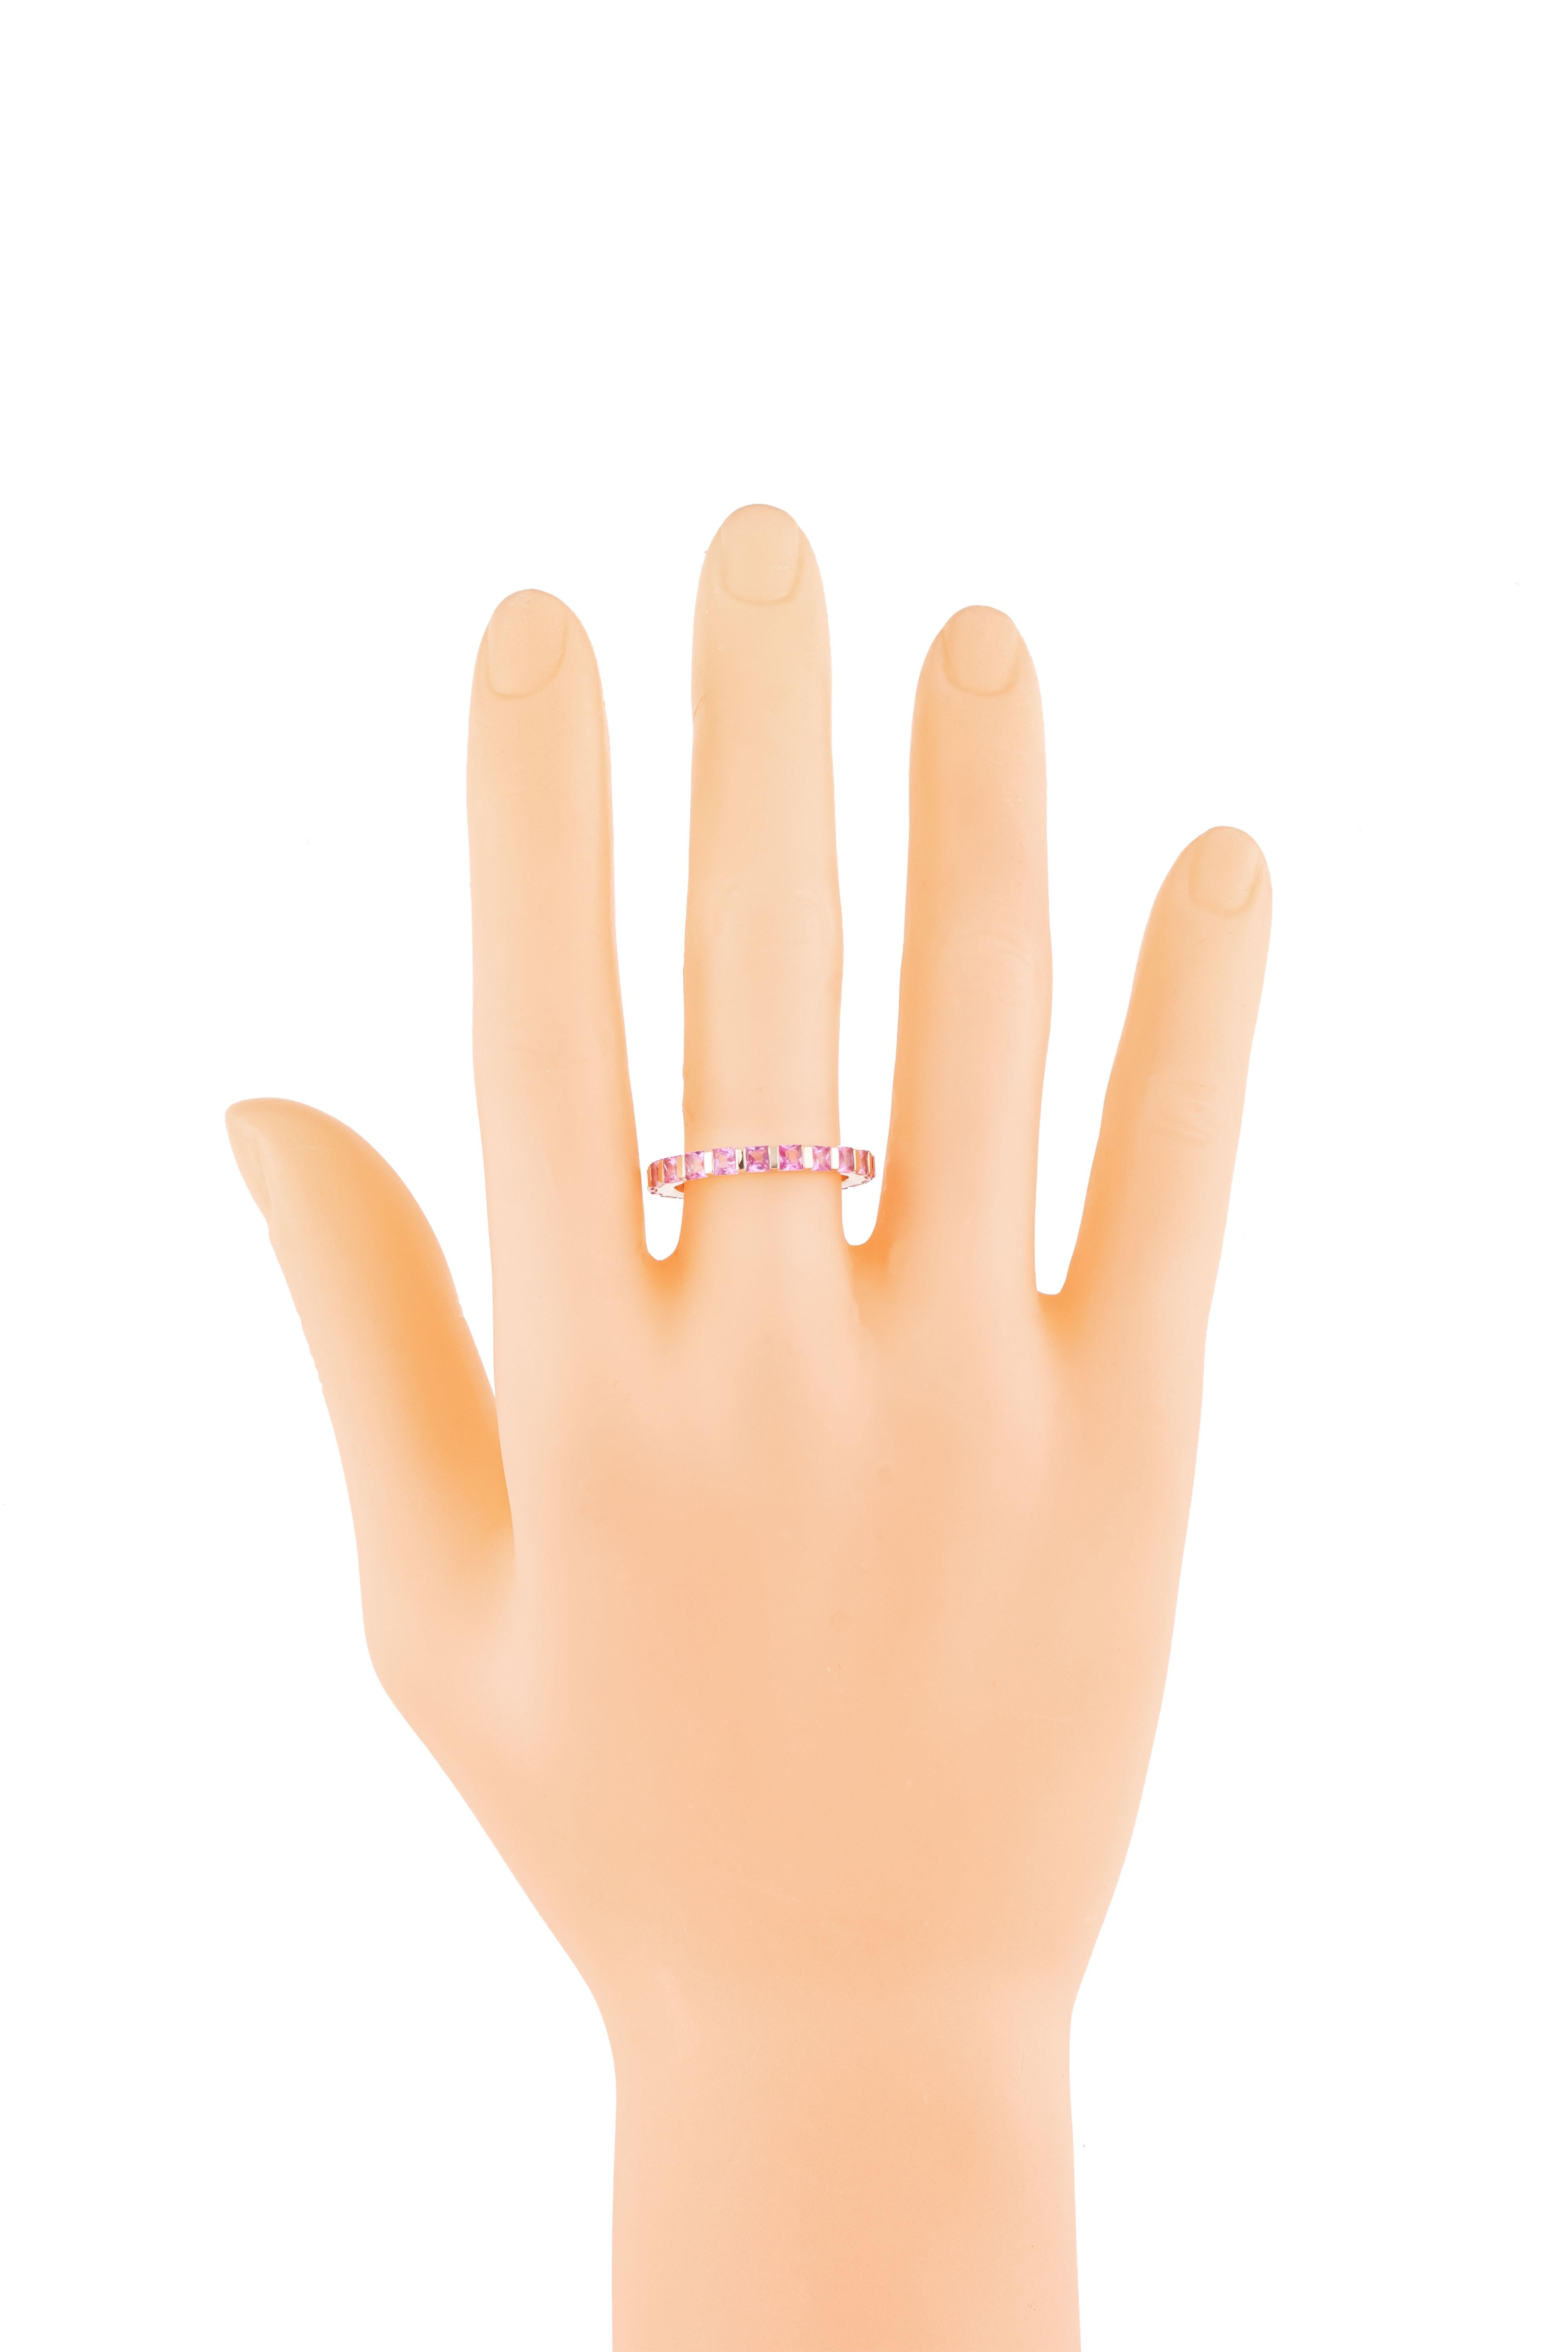 Experience the epitome of elegance with our 18 Karat Gold 2.82 Carat Pink Sapphire Eternity Ring – a timeless symbol of everlasting love and sophistication. Each ring is meticulously crafted and curated to showcase the perfect fusion of luxury and